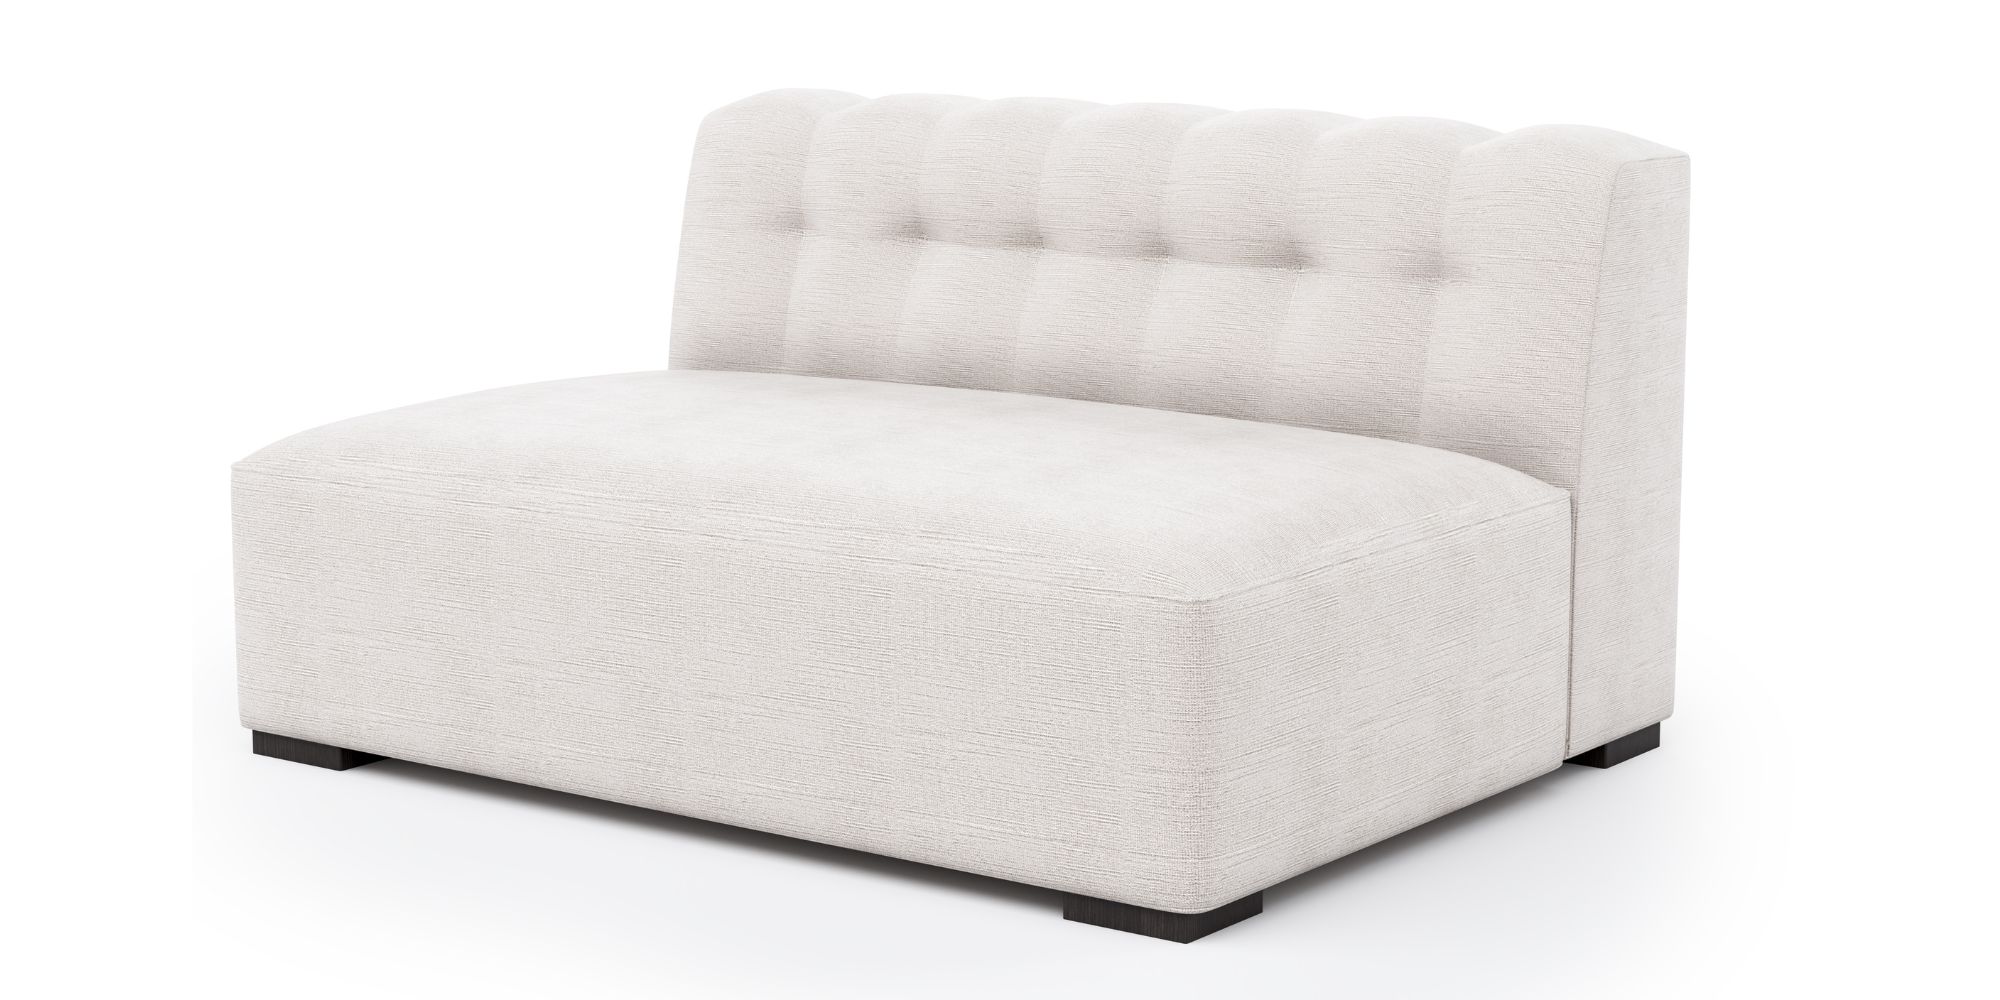 Porto Right Arm/End Section 3 Seater in Outdoor Modular Sofas for Porto collection